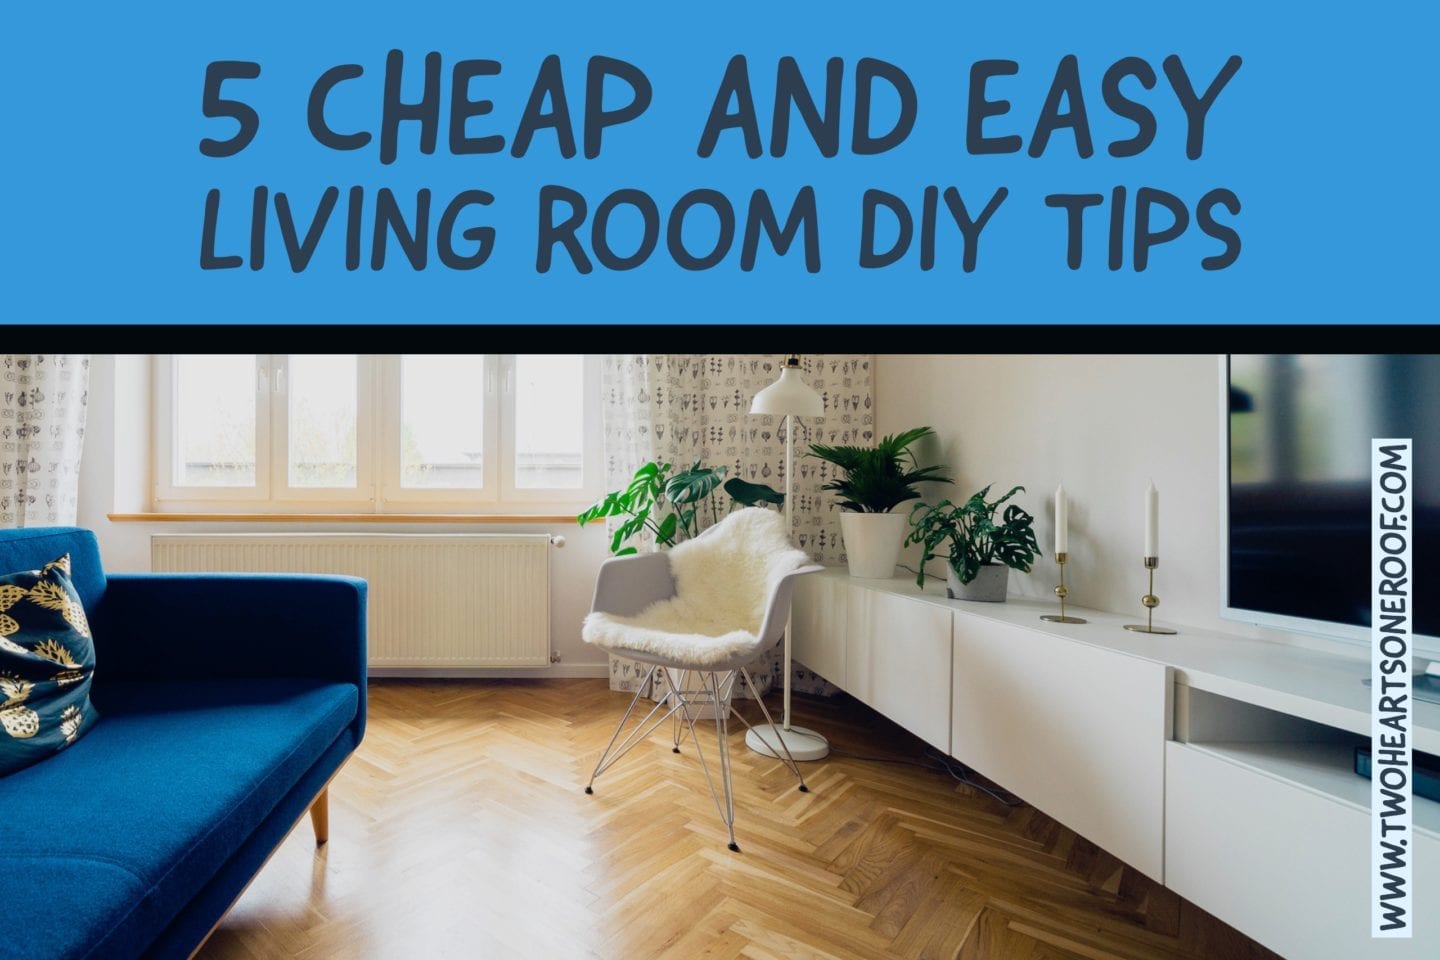 5 Cheap and Easy Living Room DIY Tips